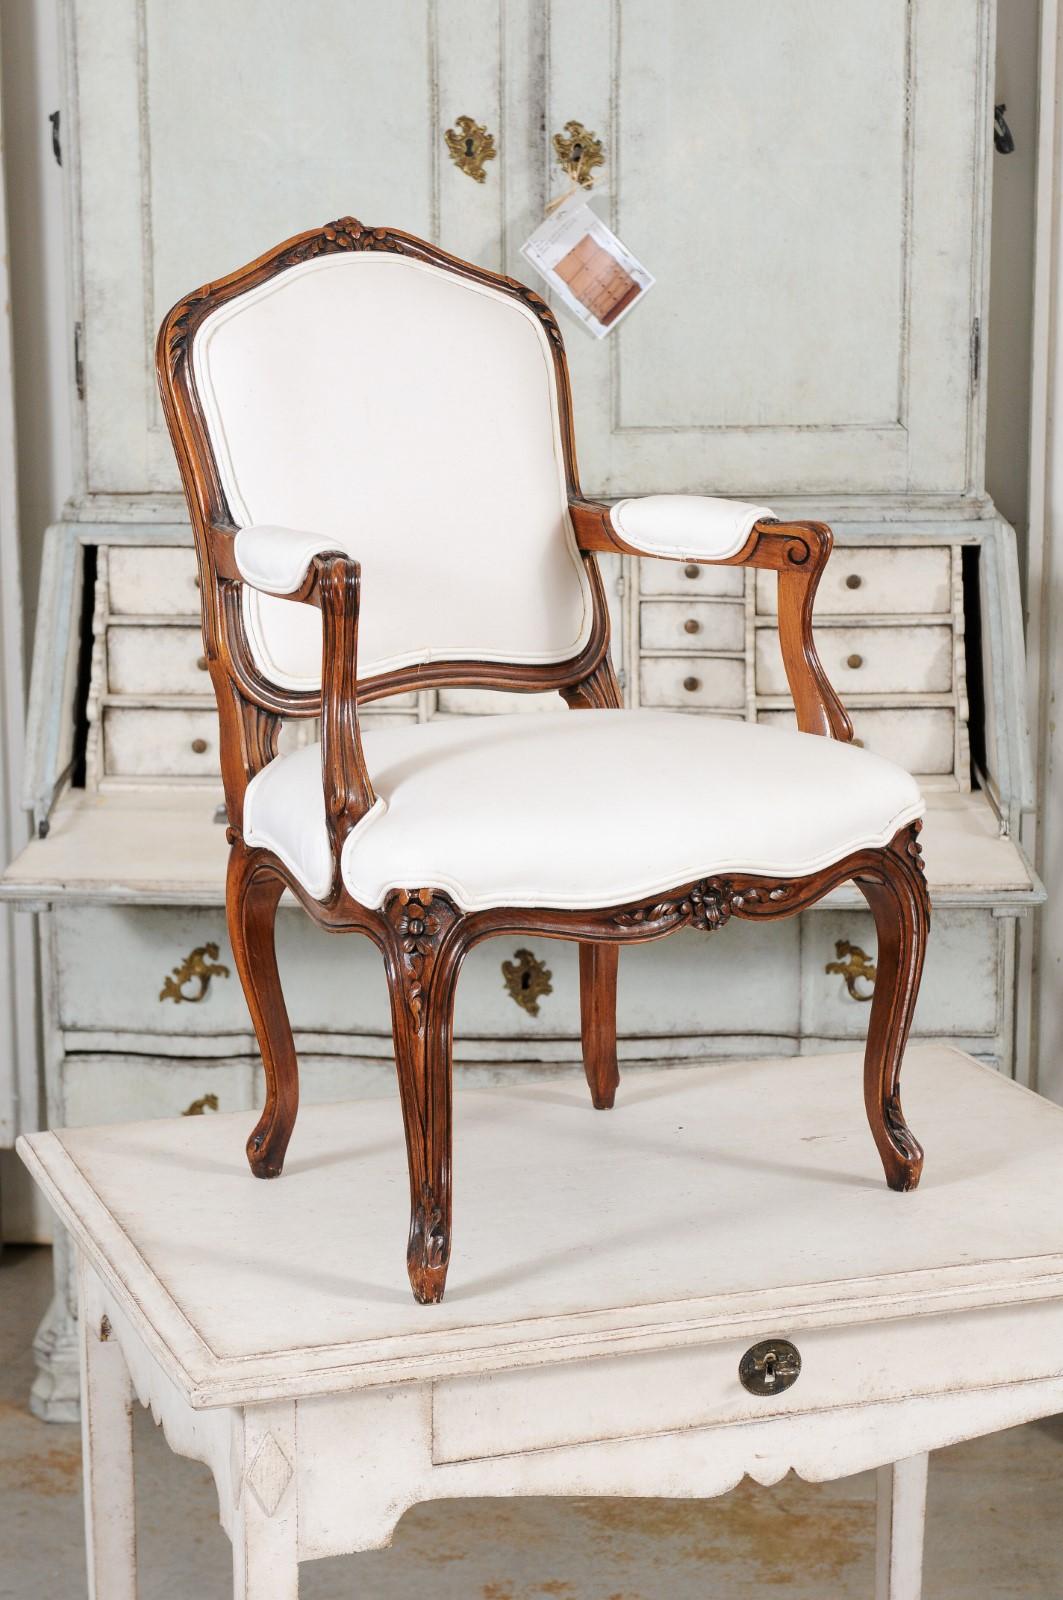 A French Louis XV style child's chair from the 19th century, with new upholstery. Created in France during the 19th century, this wooden child's chair charms us with its petite proportions and graceful Louis XV style lines. Carved with petite